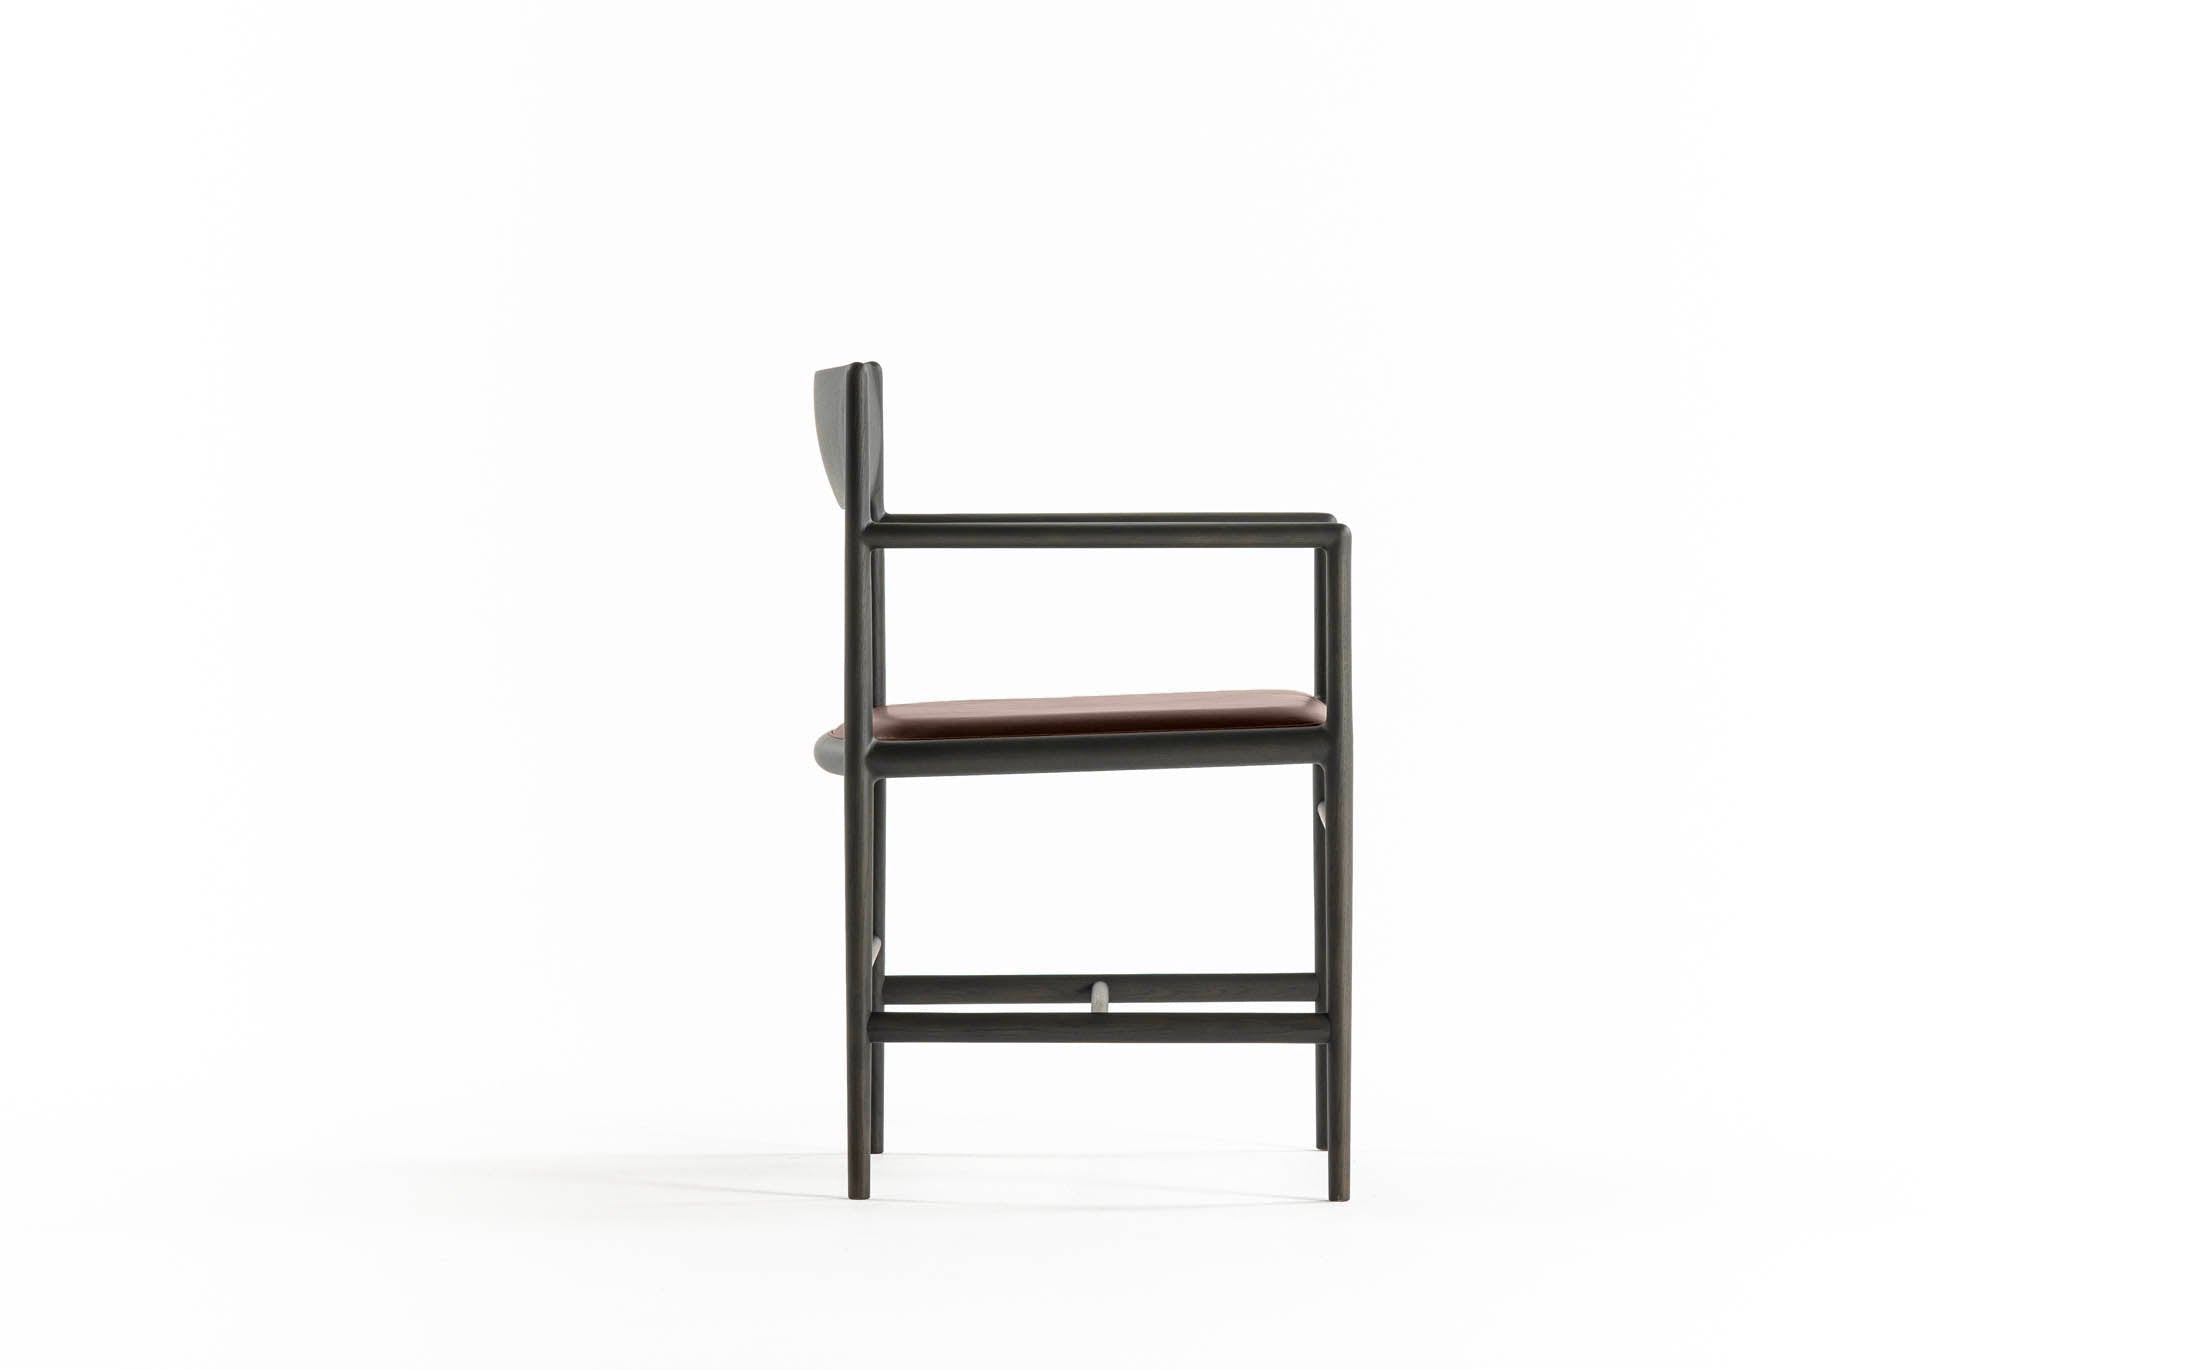 A chair on the vertical axis